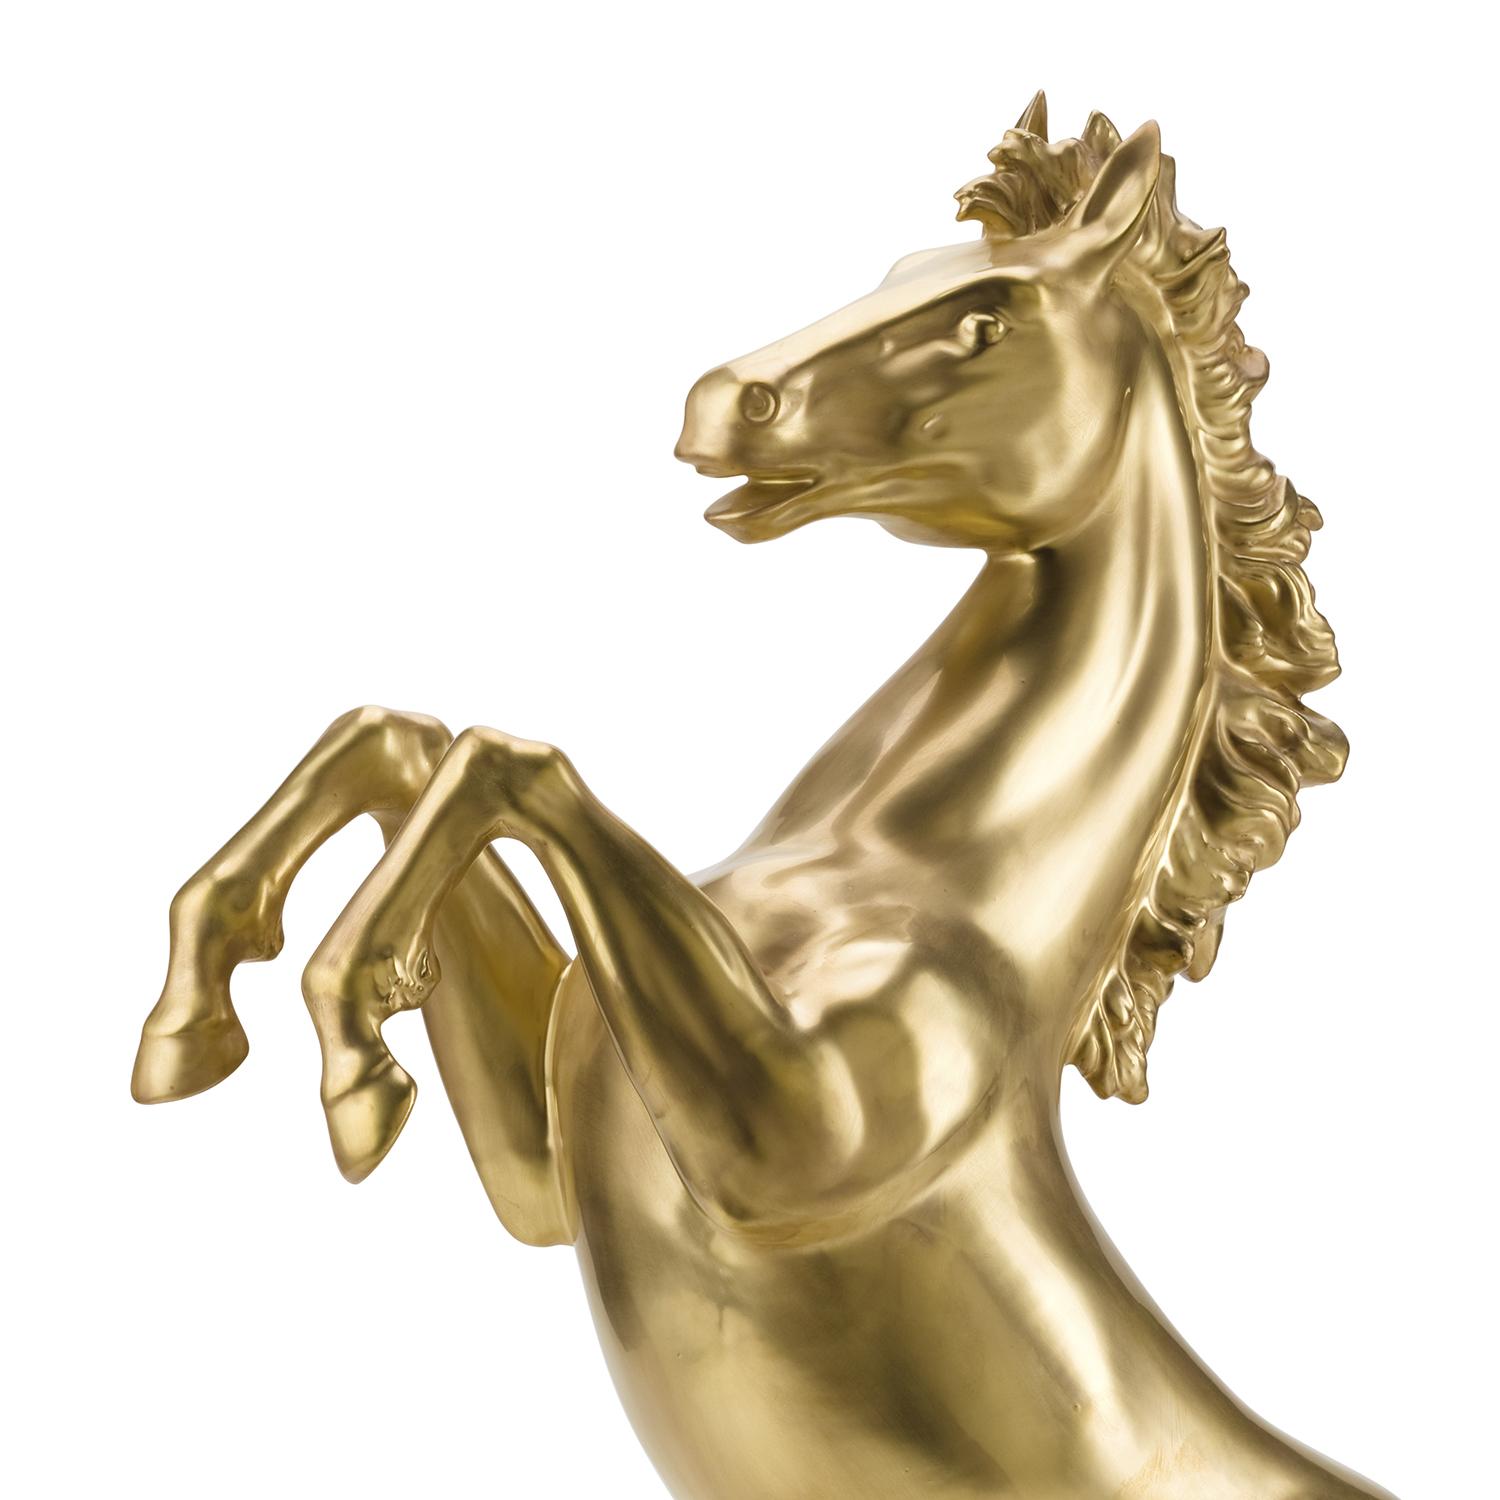 Sculpture prancing stallion all made
in porcelain and gold-plated in 24-karat.